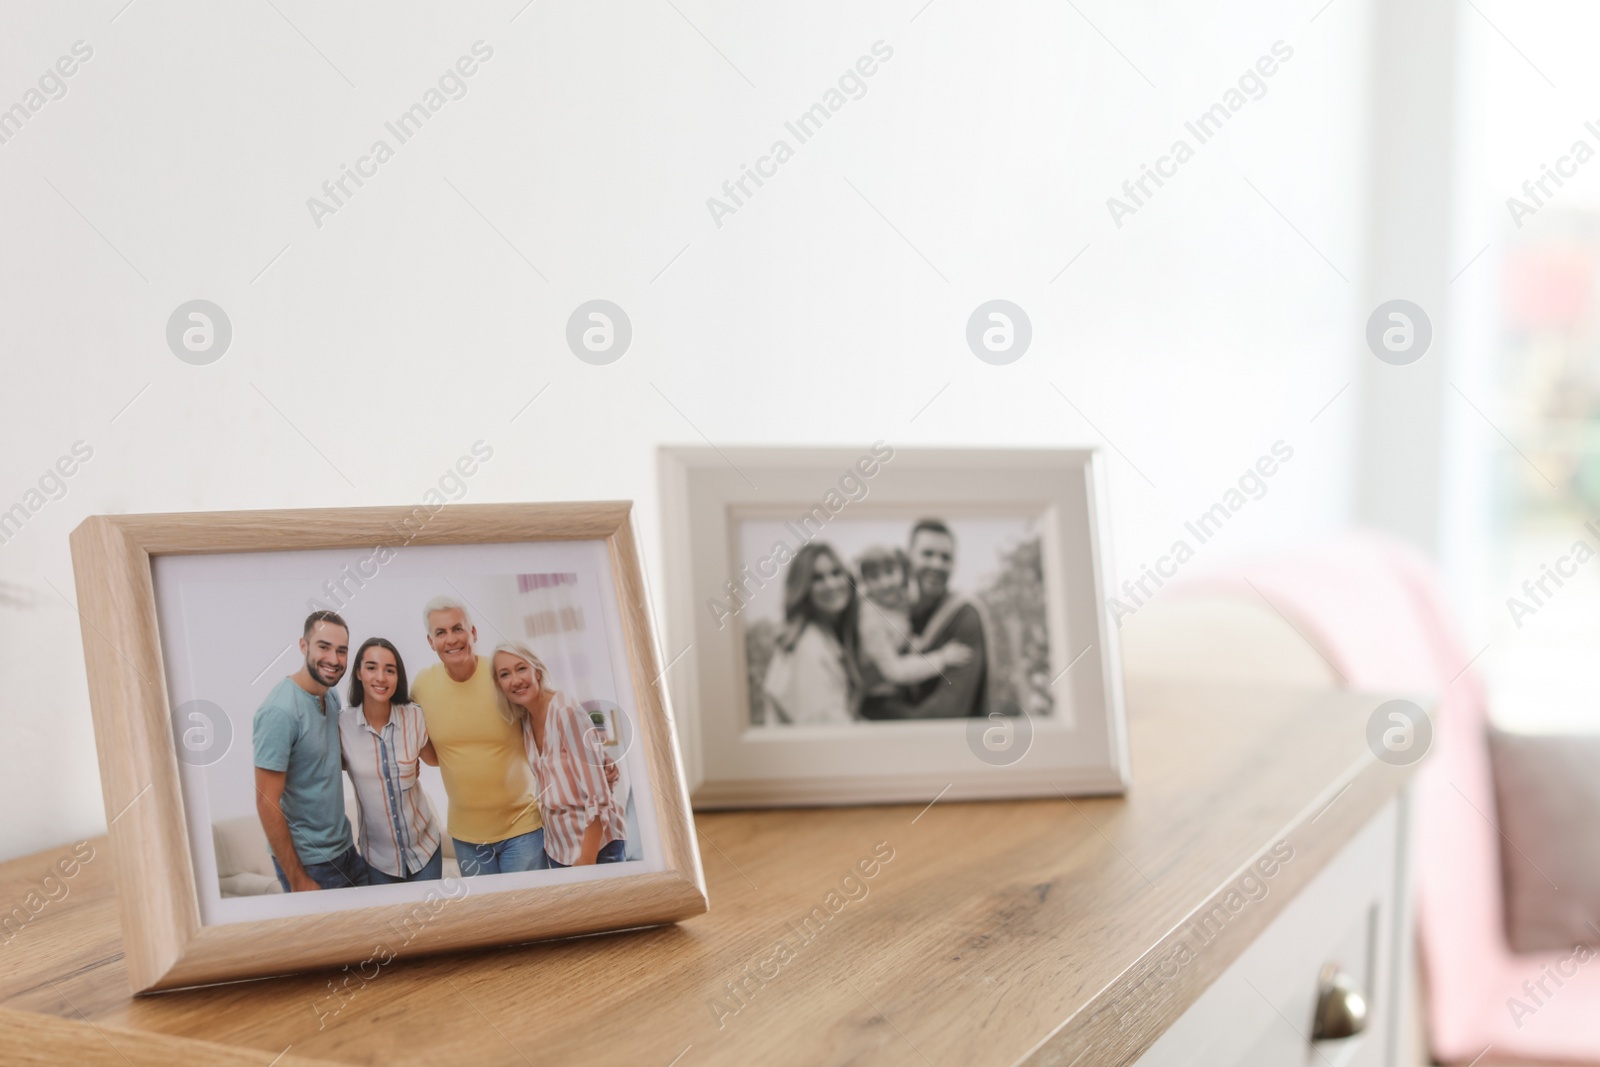 Photo of Family portraits in frames on cabinet indoors